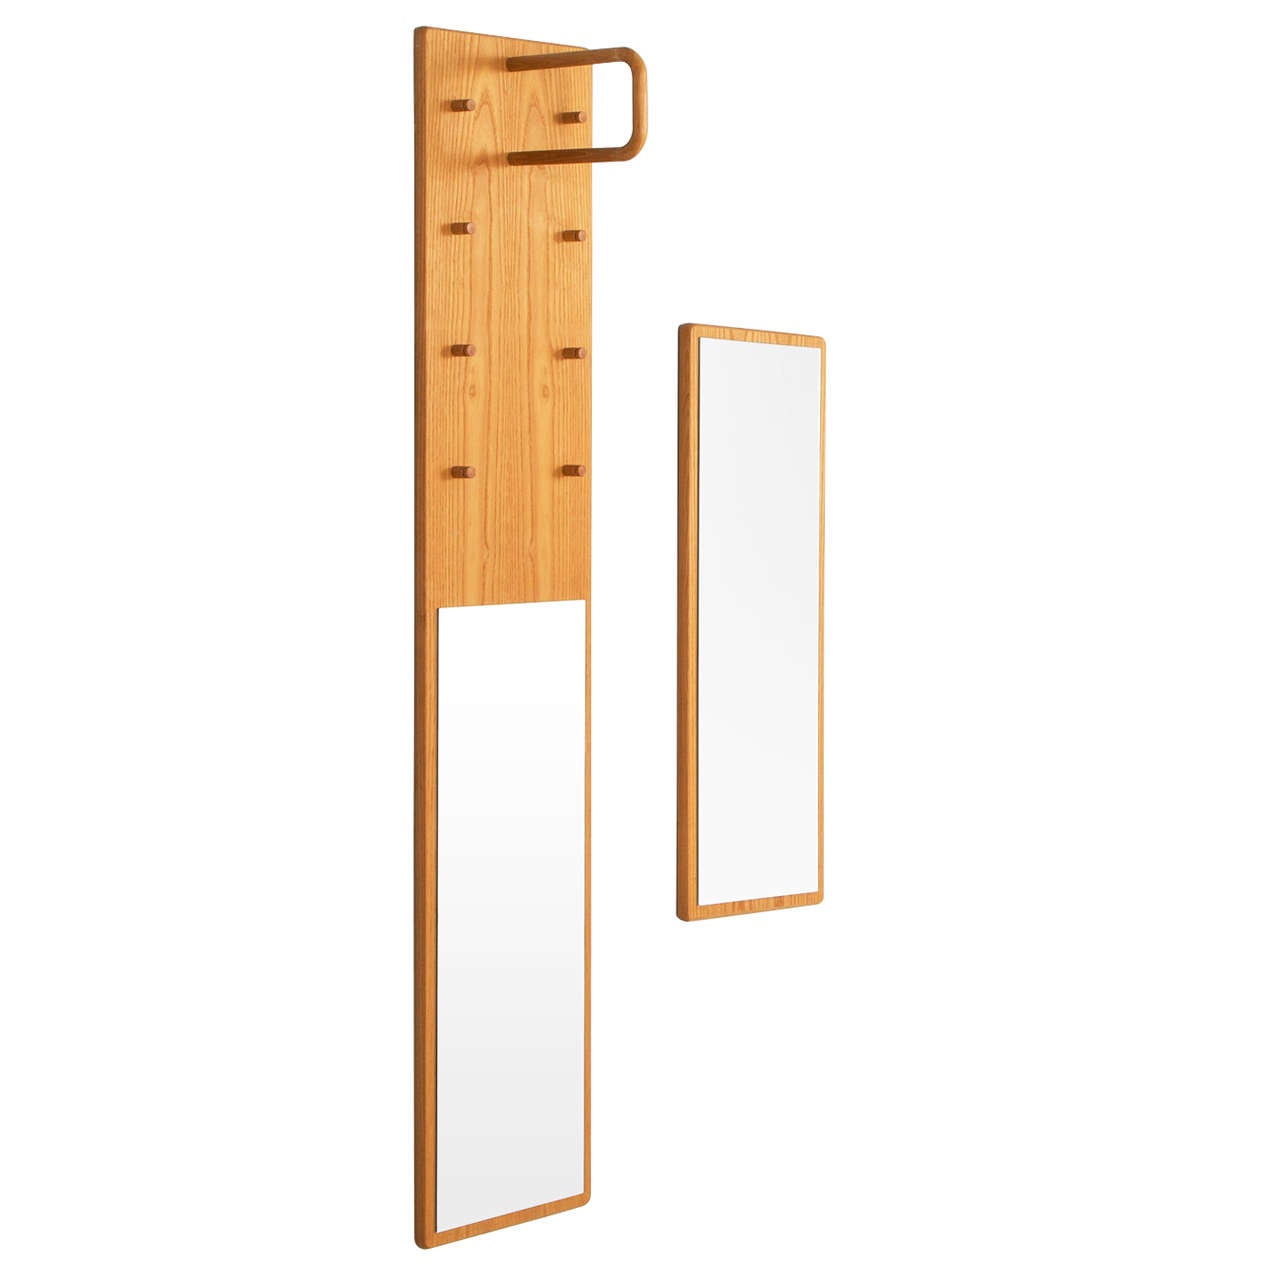 Set of Two Swedish Rectangular Shaped Mirrors with Coat Stand